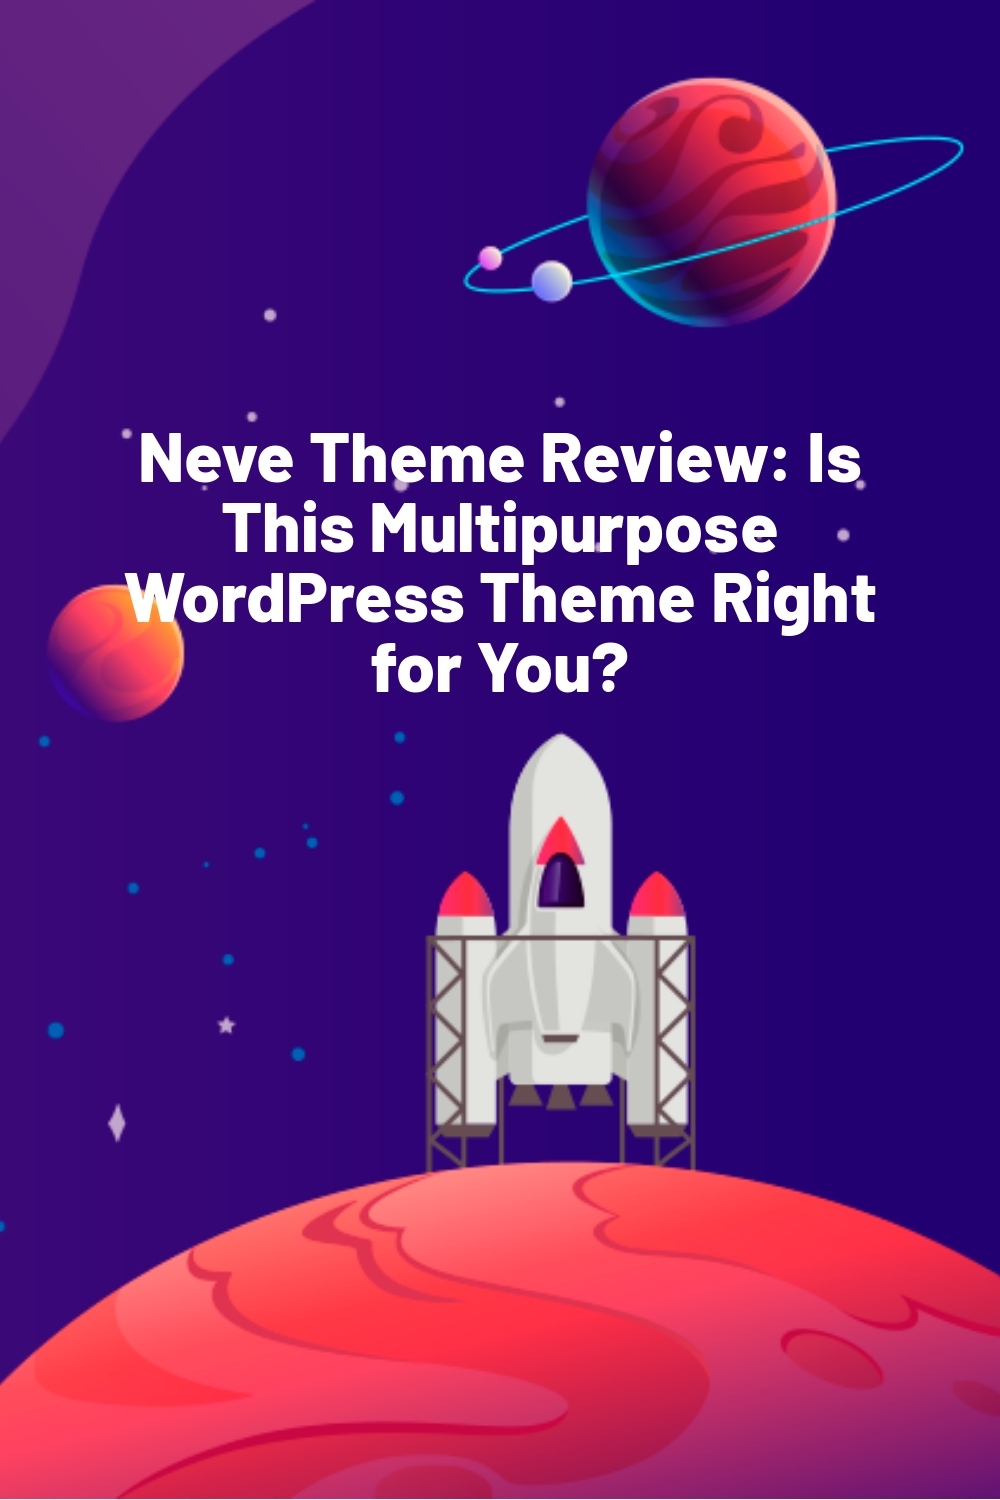 Neve Theme Review: Is This Multipurpose WordPress Theme Right for You?